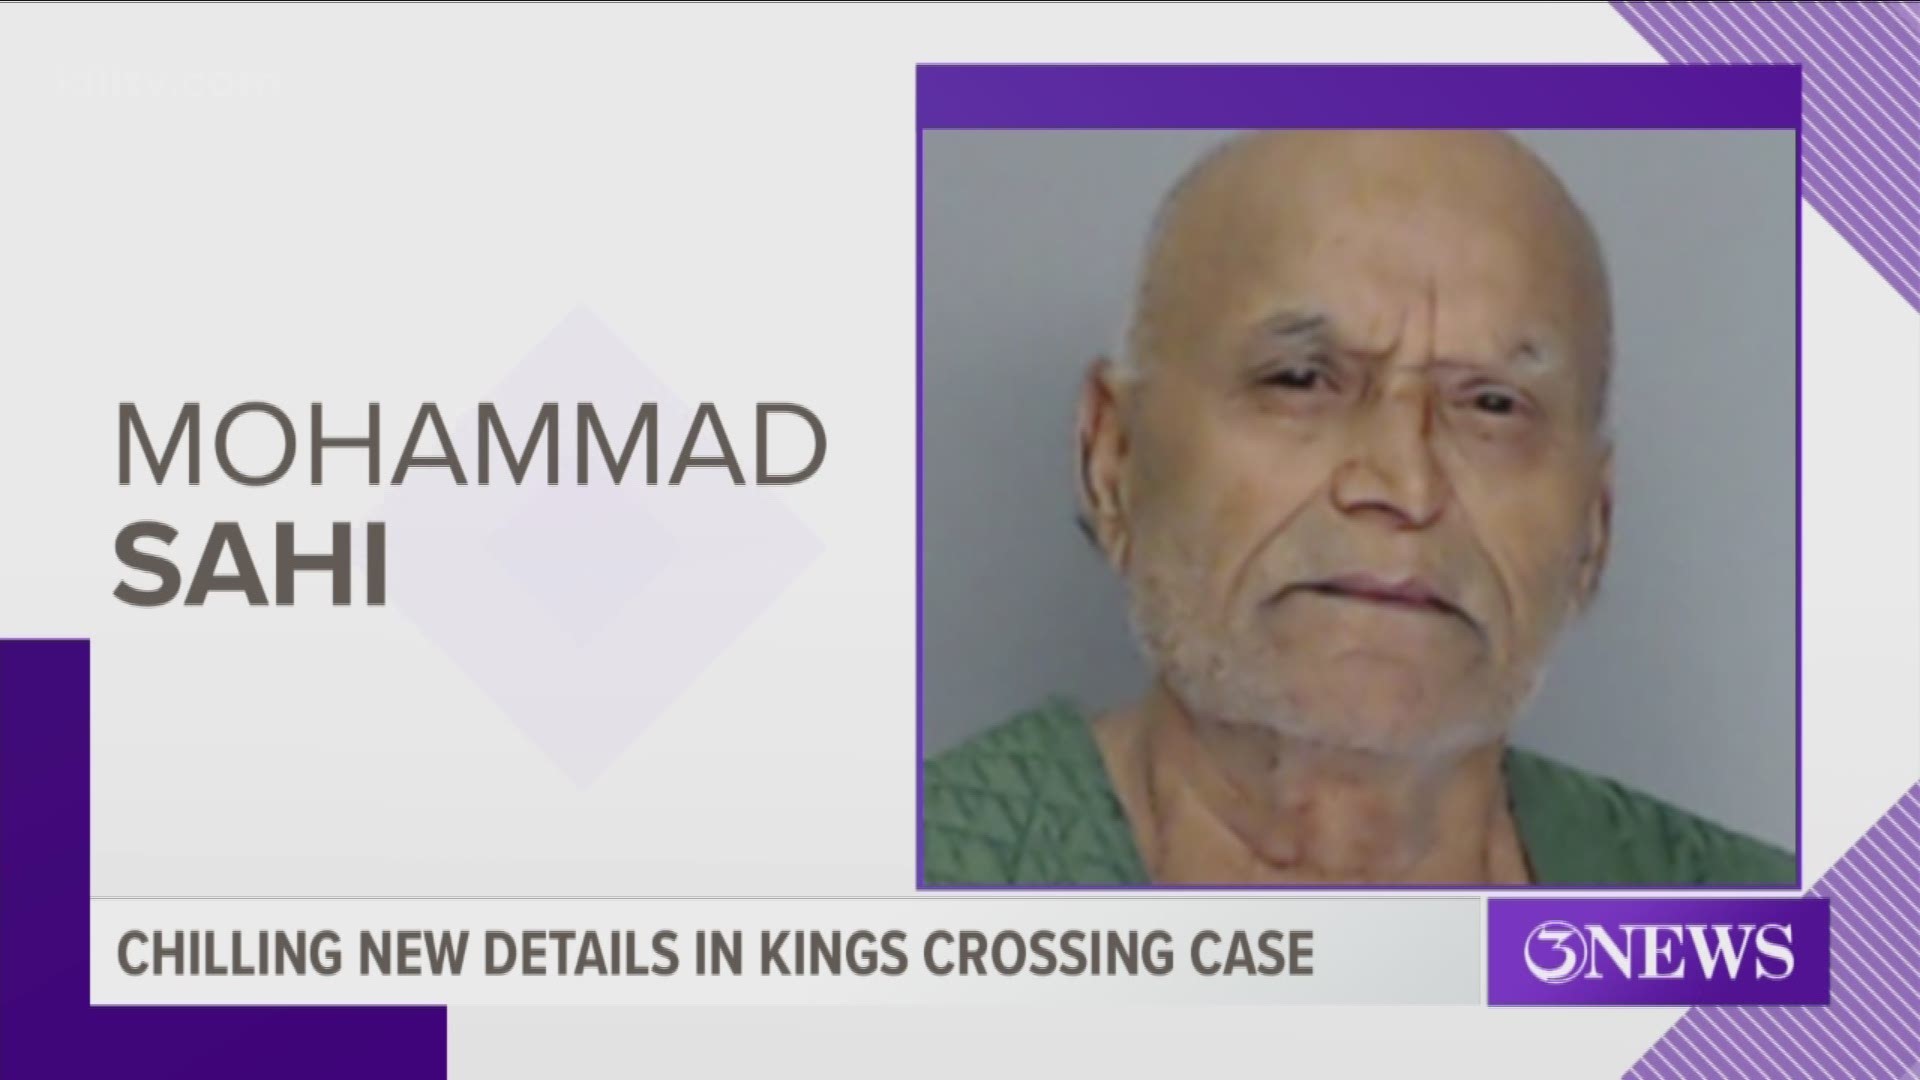 72-year-old Mohammad Sahi is facing charges of capital murder and assault with a deadly weapon.